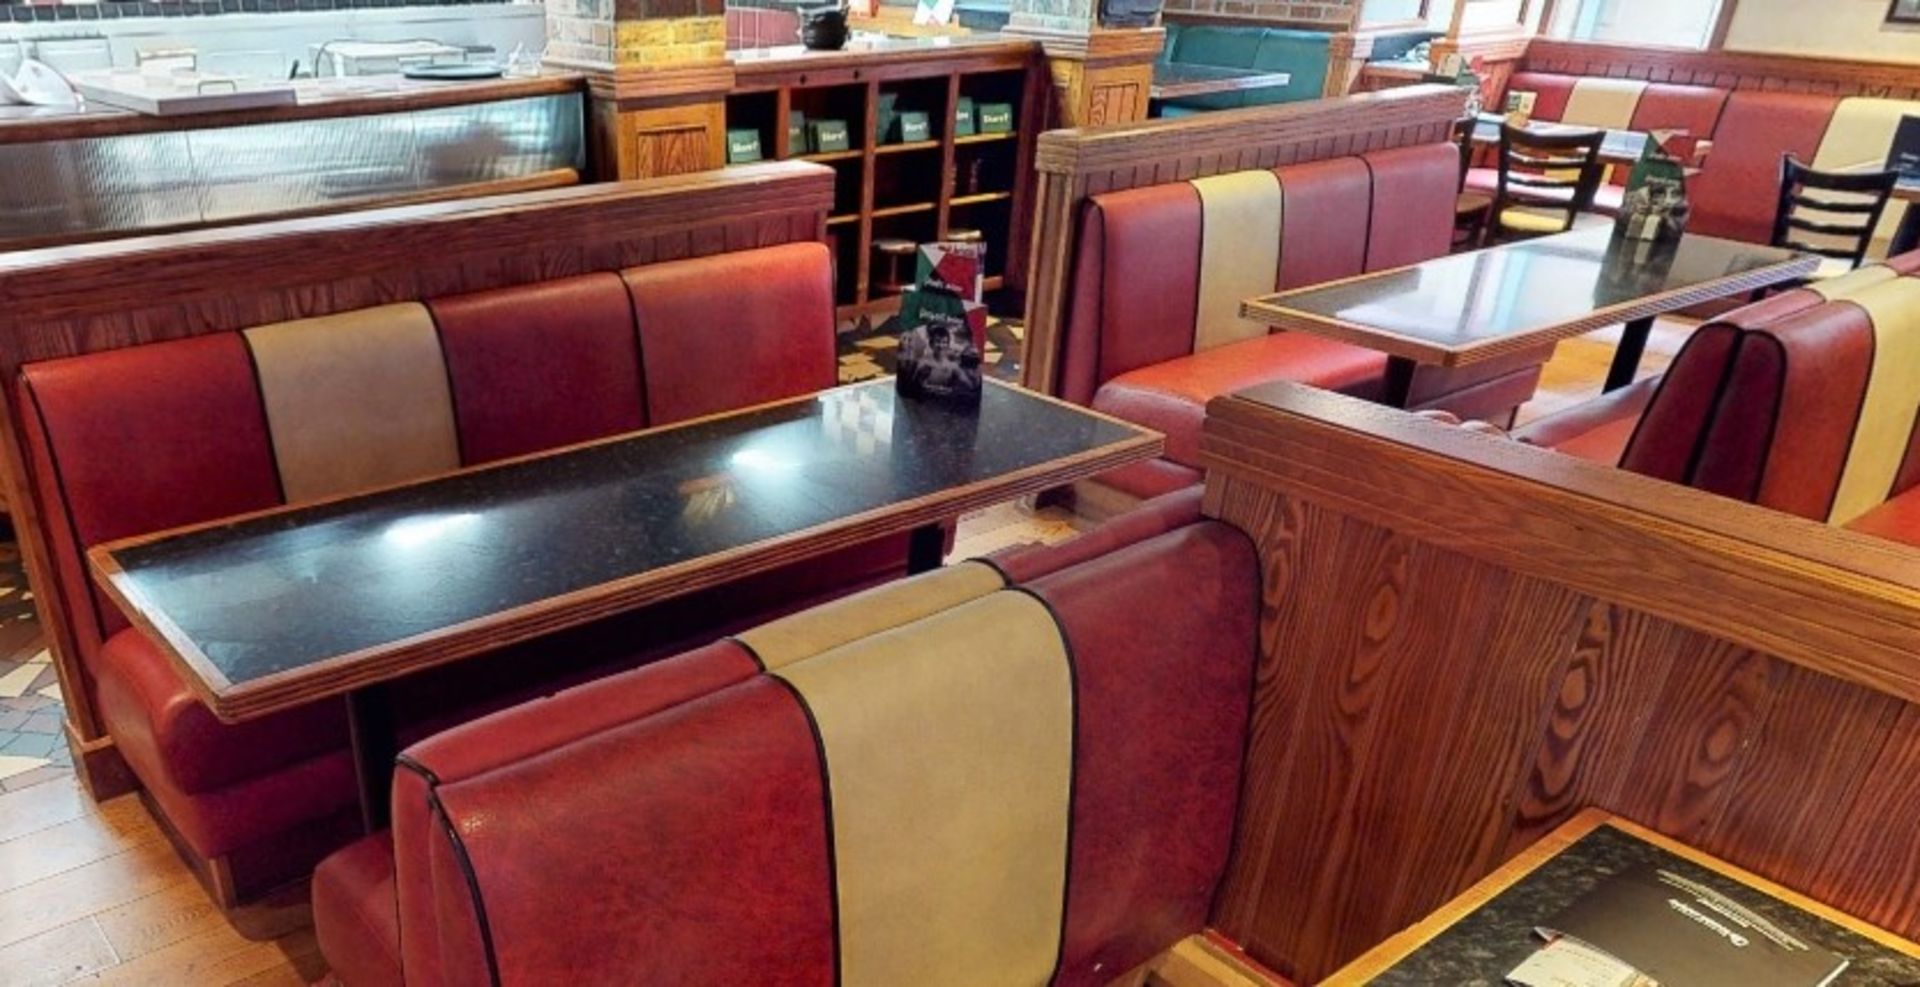 1 x Selection of Double Seating Benches and Dining Tables to Seat Upto 12 Persons - Retro 1950's - Image 2 of 5